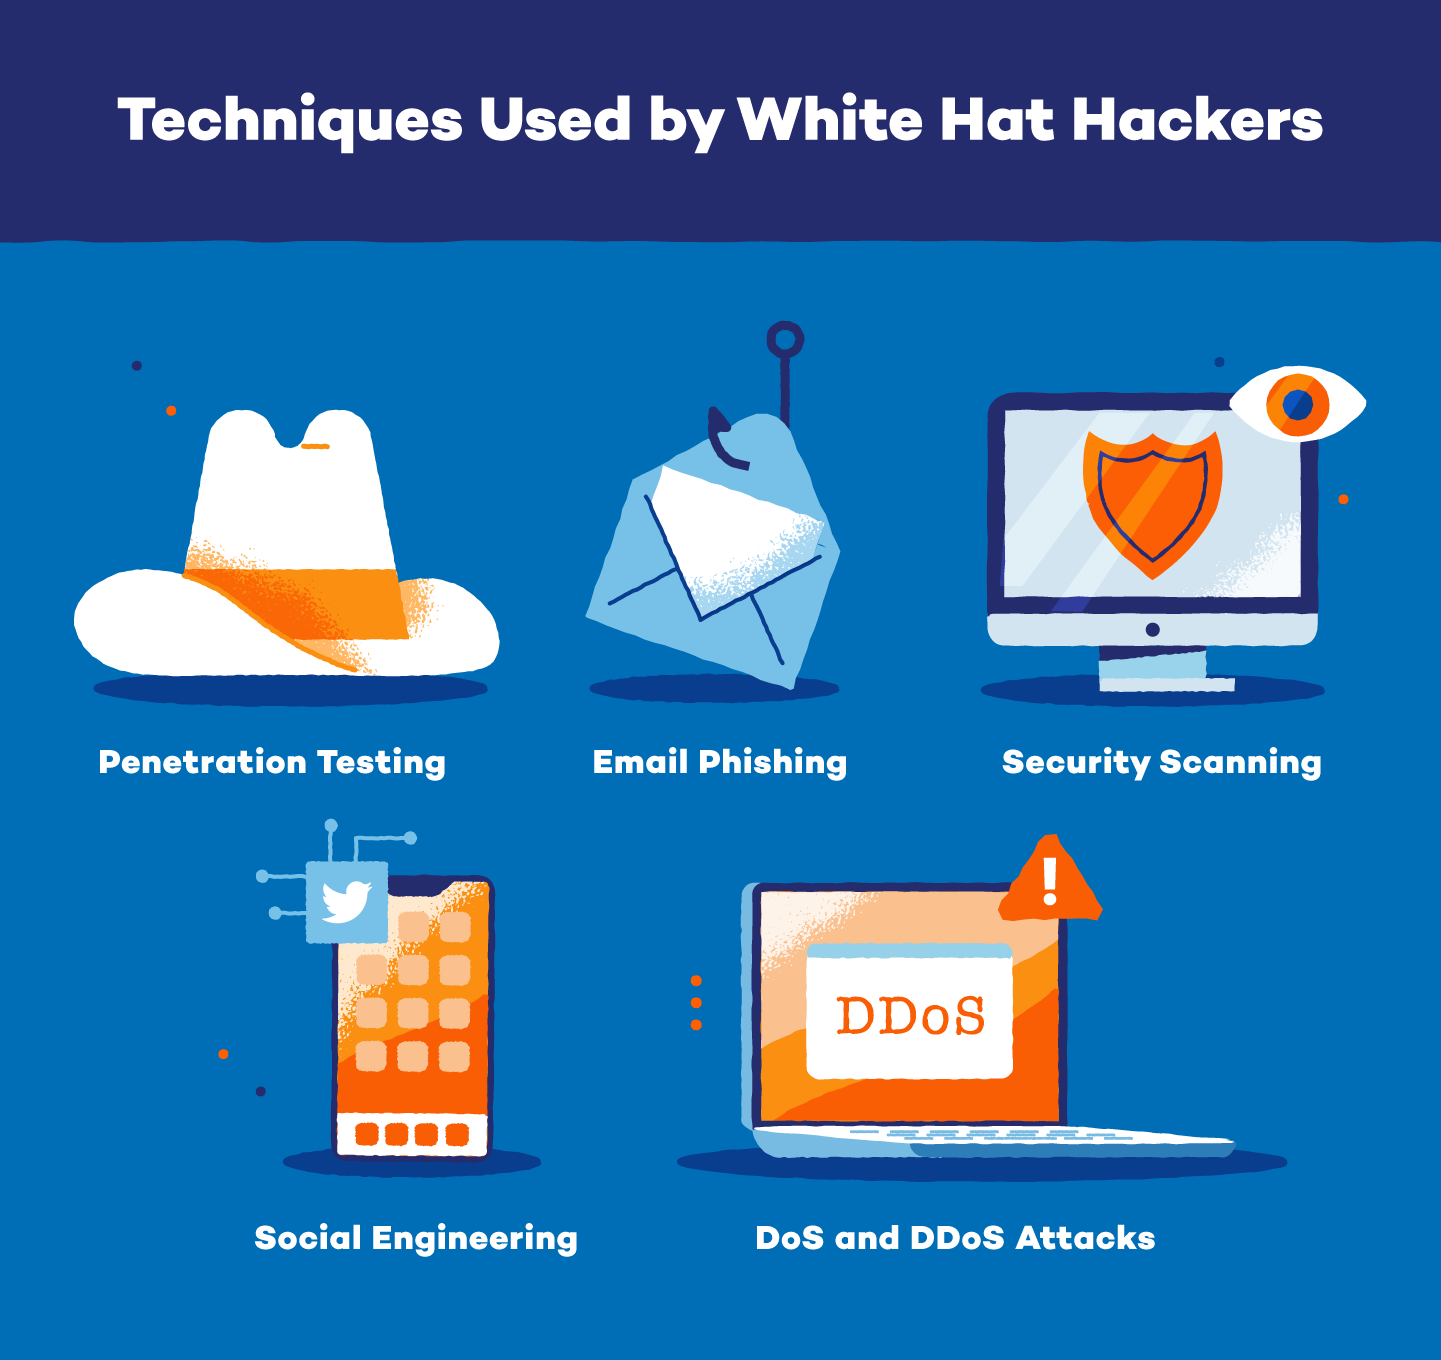 Illustrations of the techniques and tools white hat hackers use.